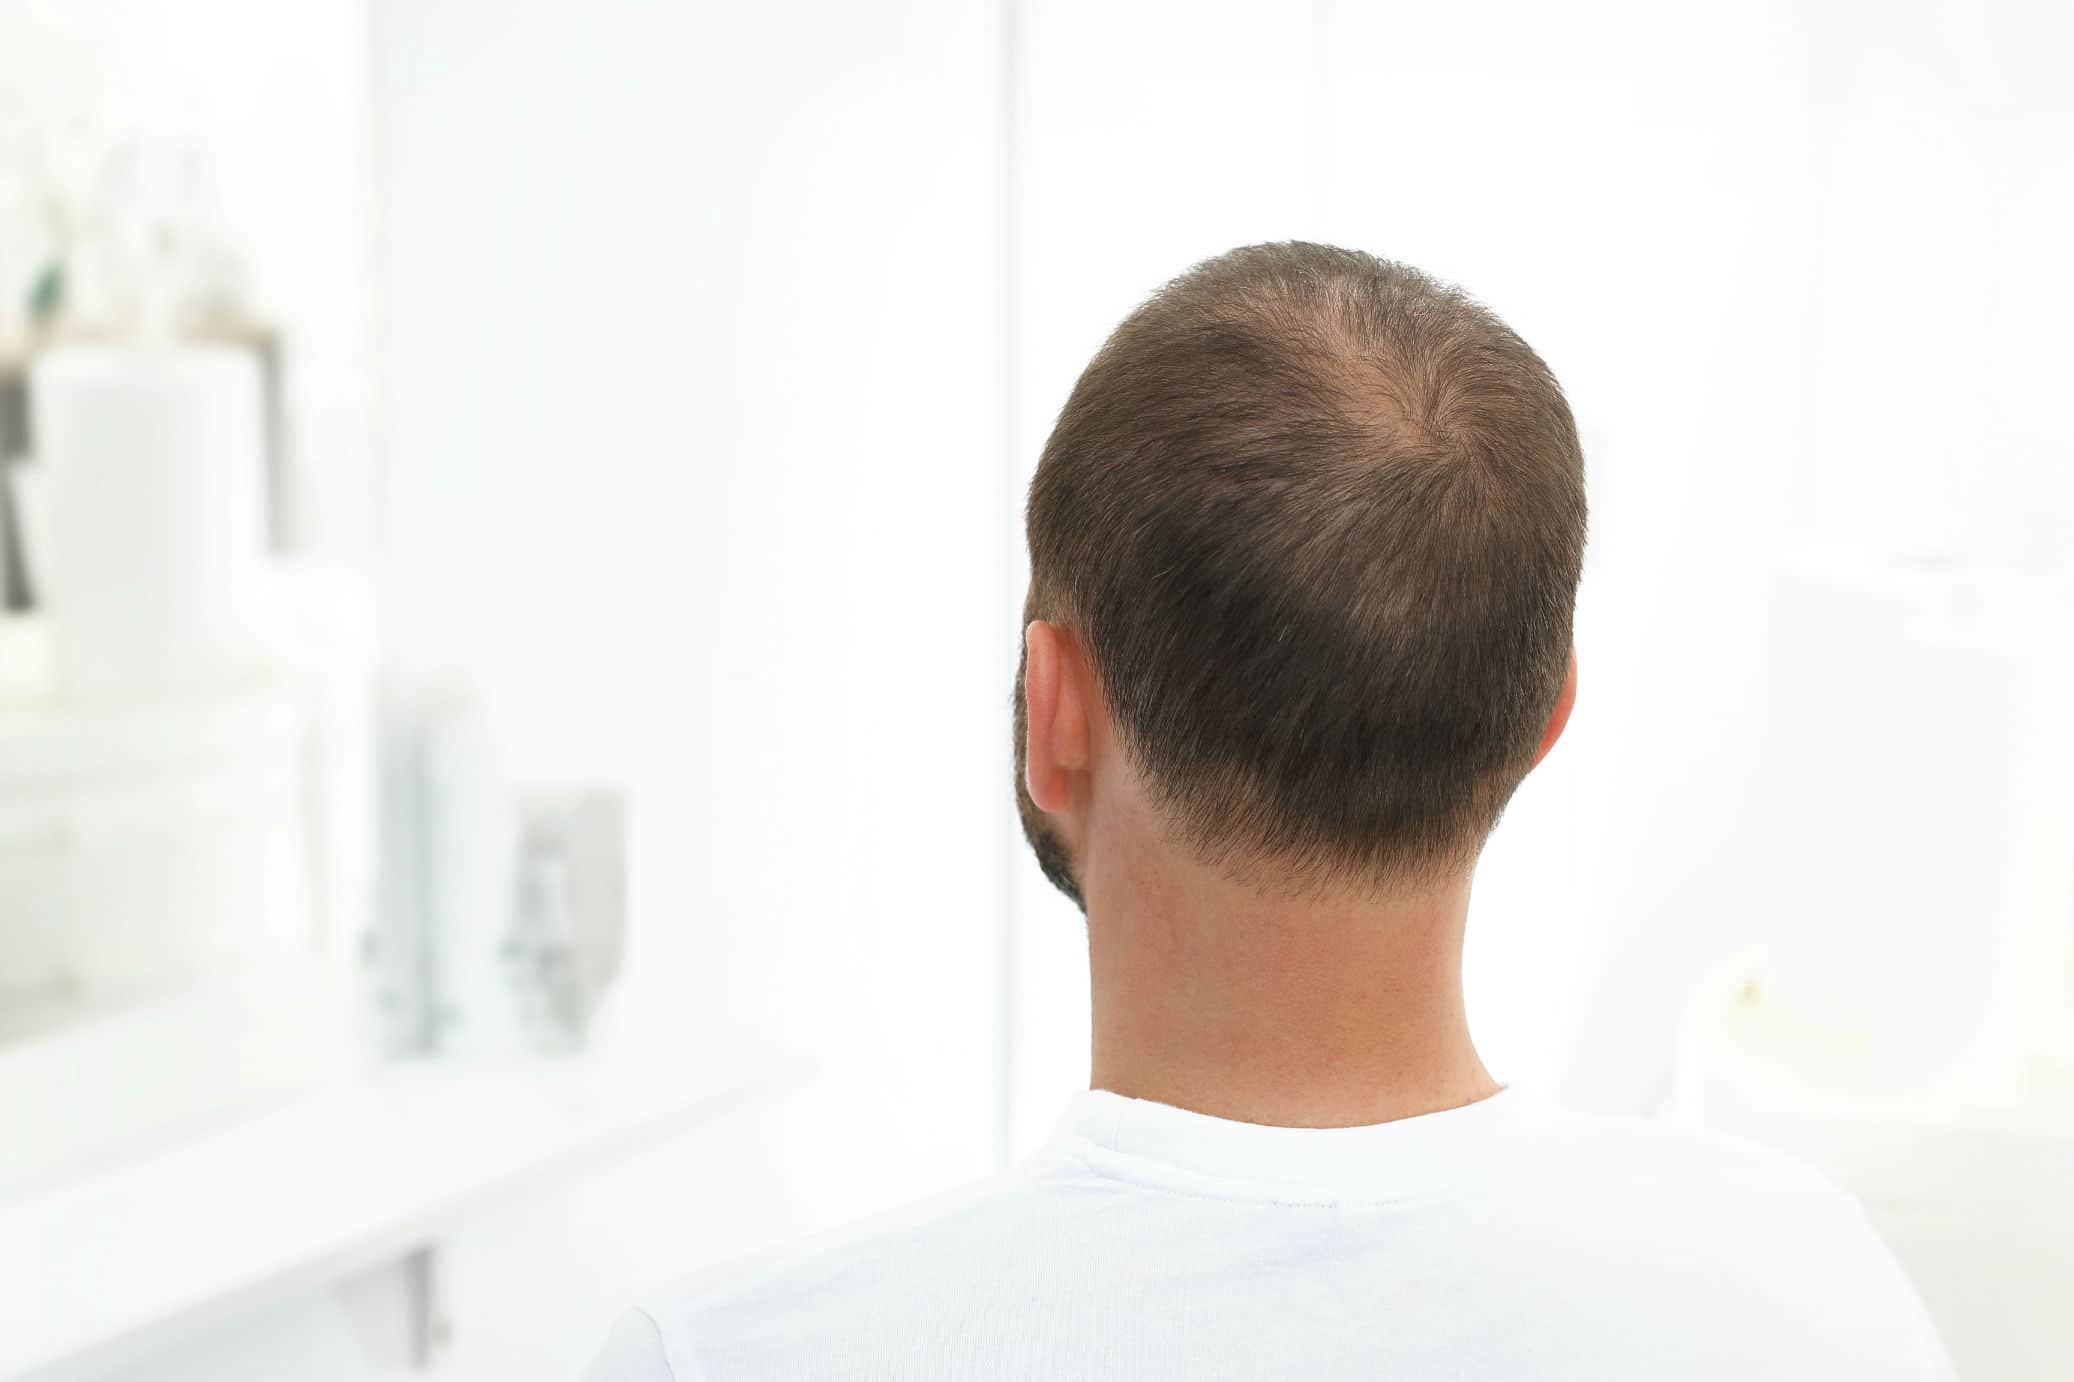 Best Haircut For A Receding Hairline Options For Thinning Baldness